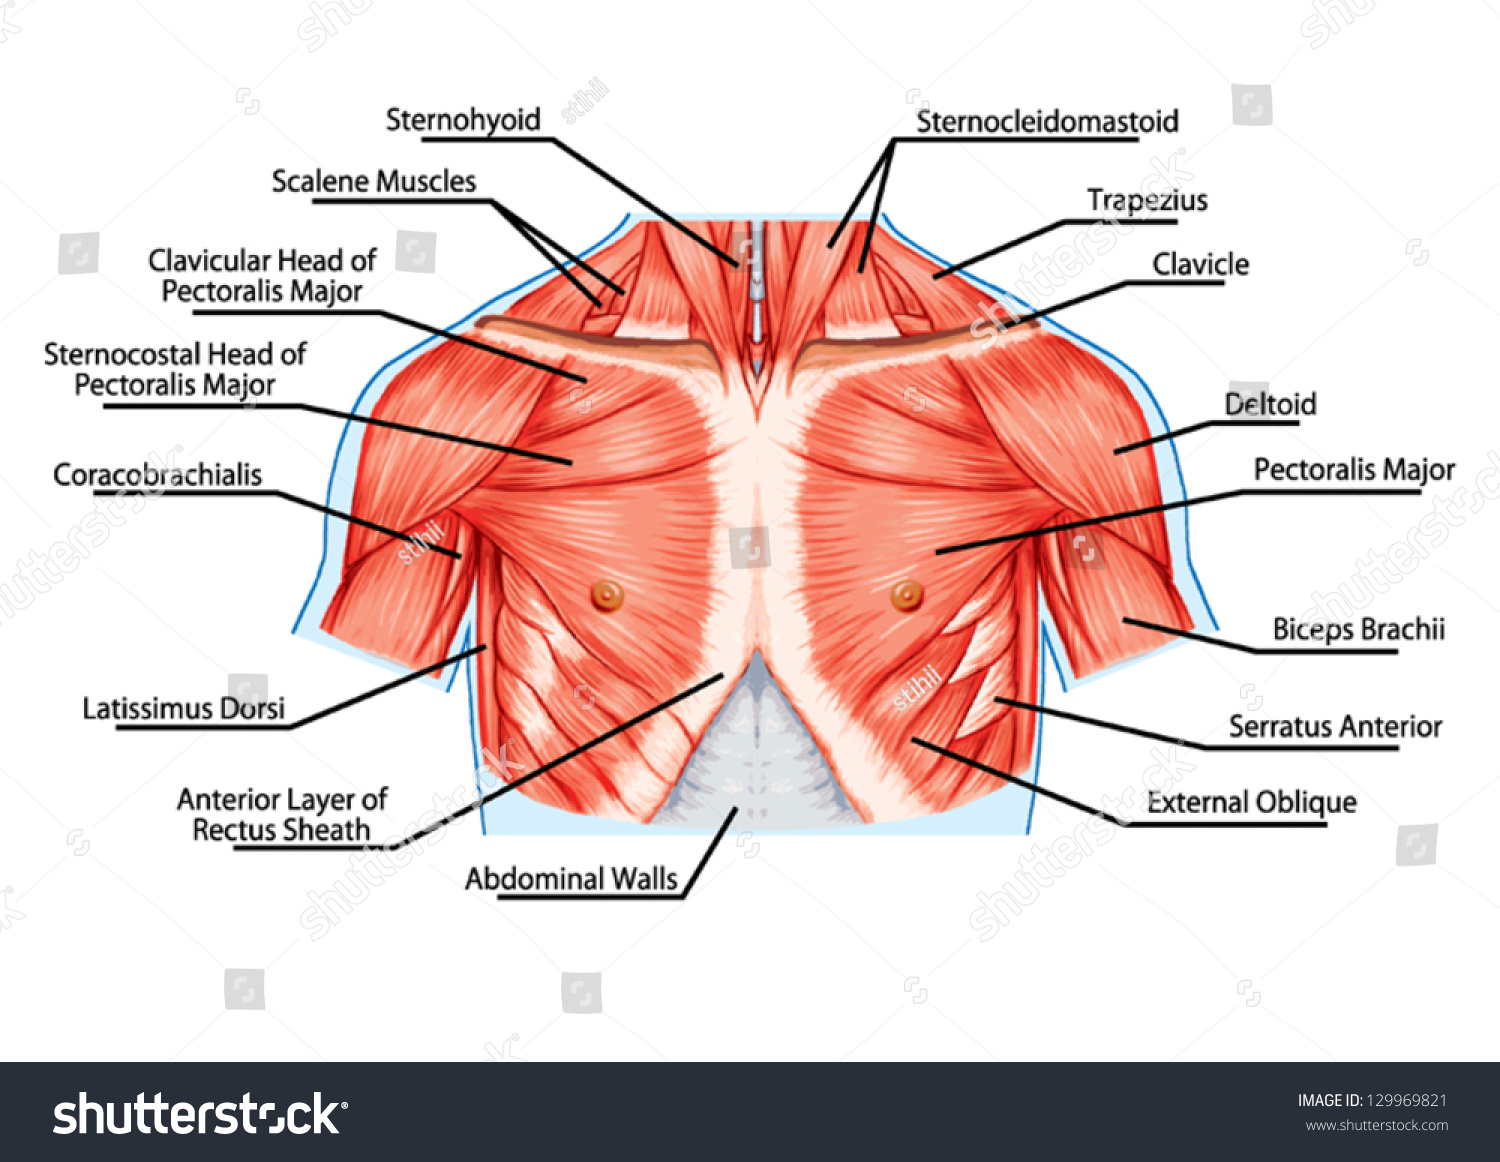 Pectoralis Major Muscle, Muscles Of Chest, Thorax, Brisket, Breast